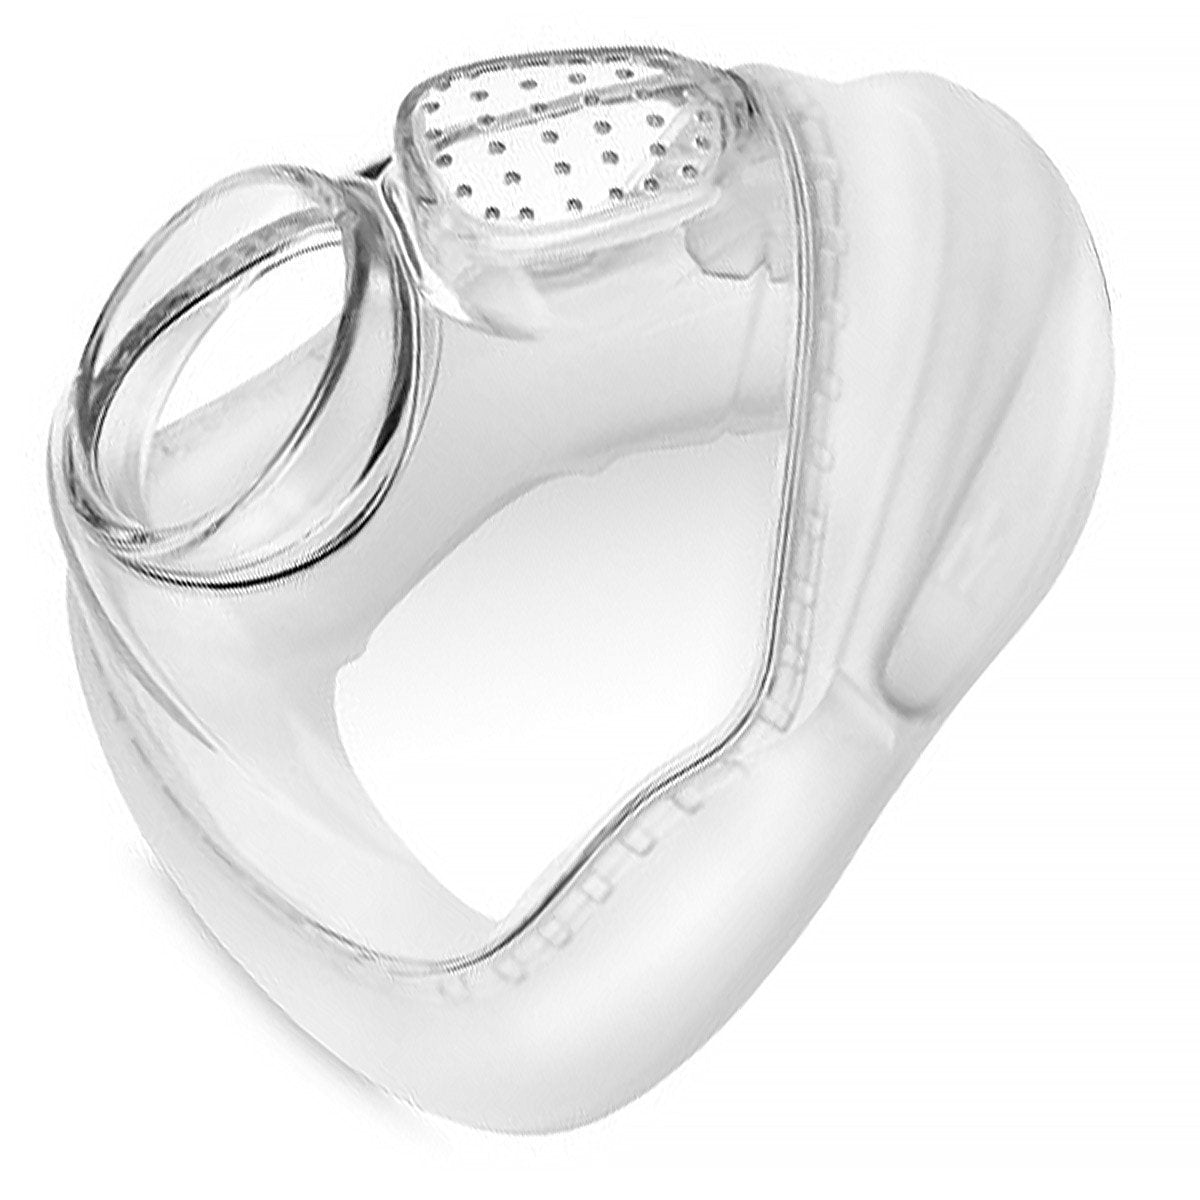 Fisher & Paykel Simplus Full Face Mask Cushion